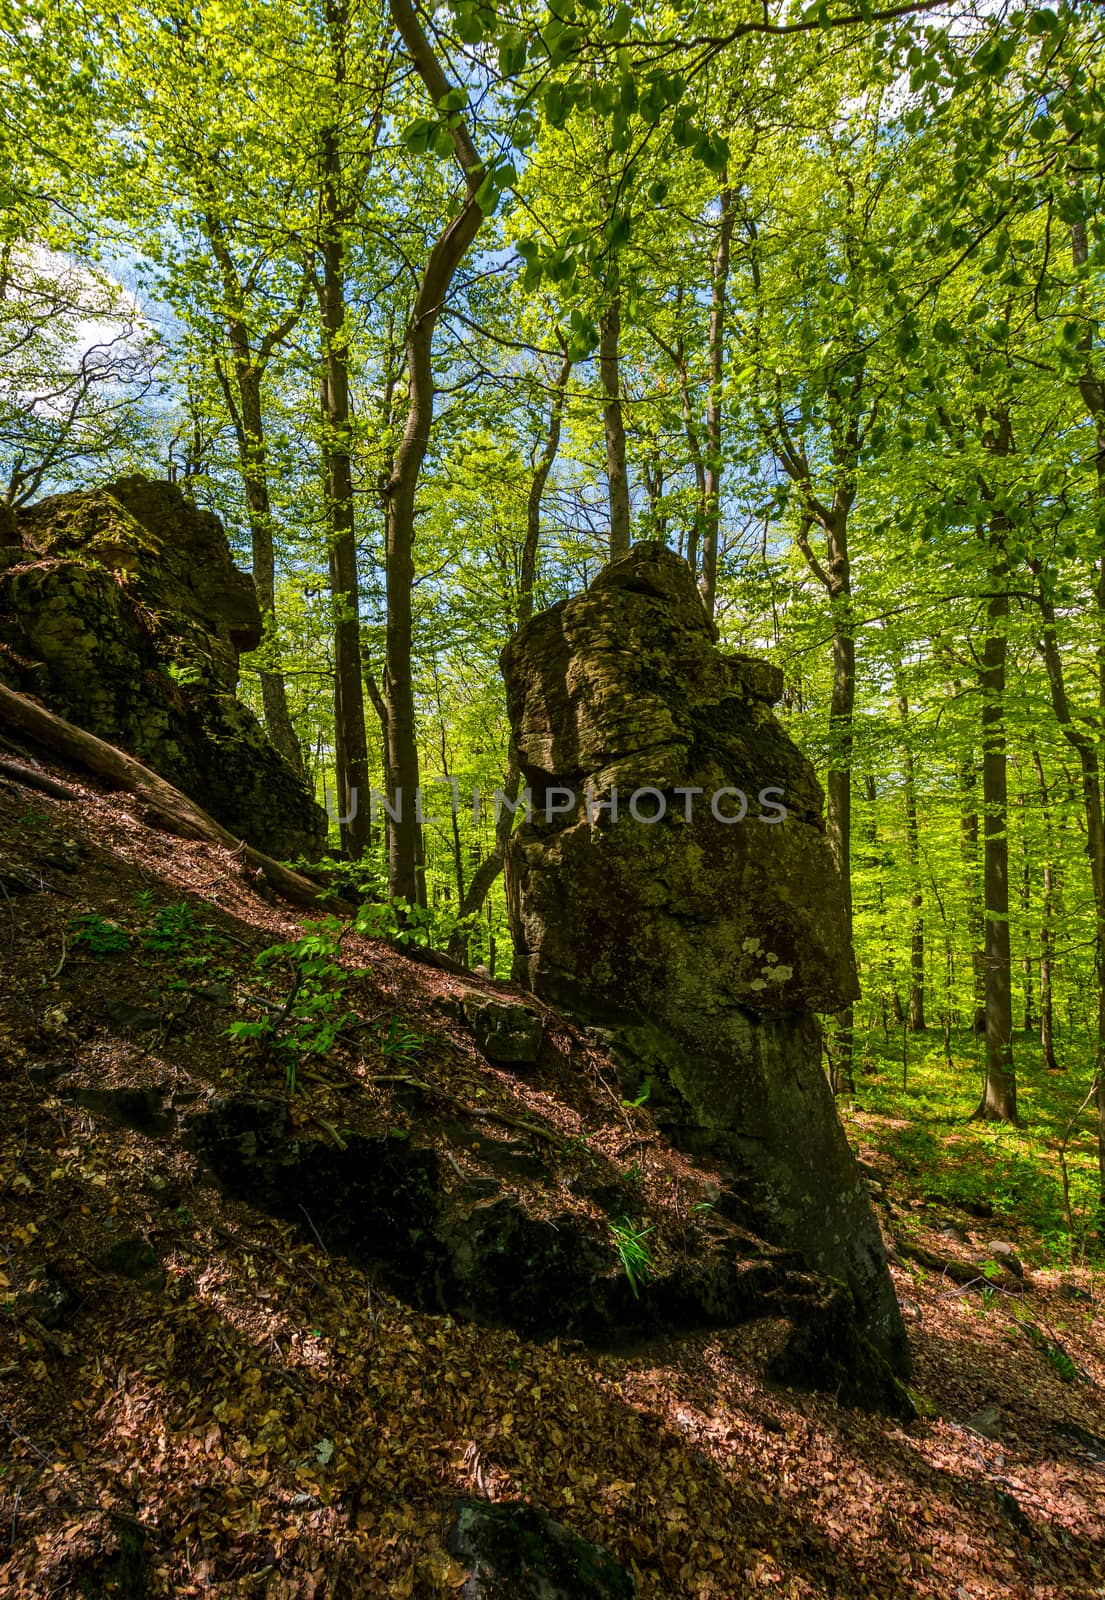 rocky formation among the green forest. mysterious place looks like stone idol. lovely place in wild woods